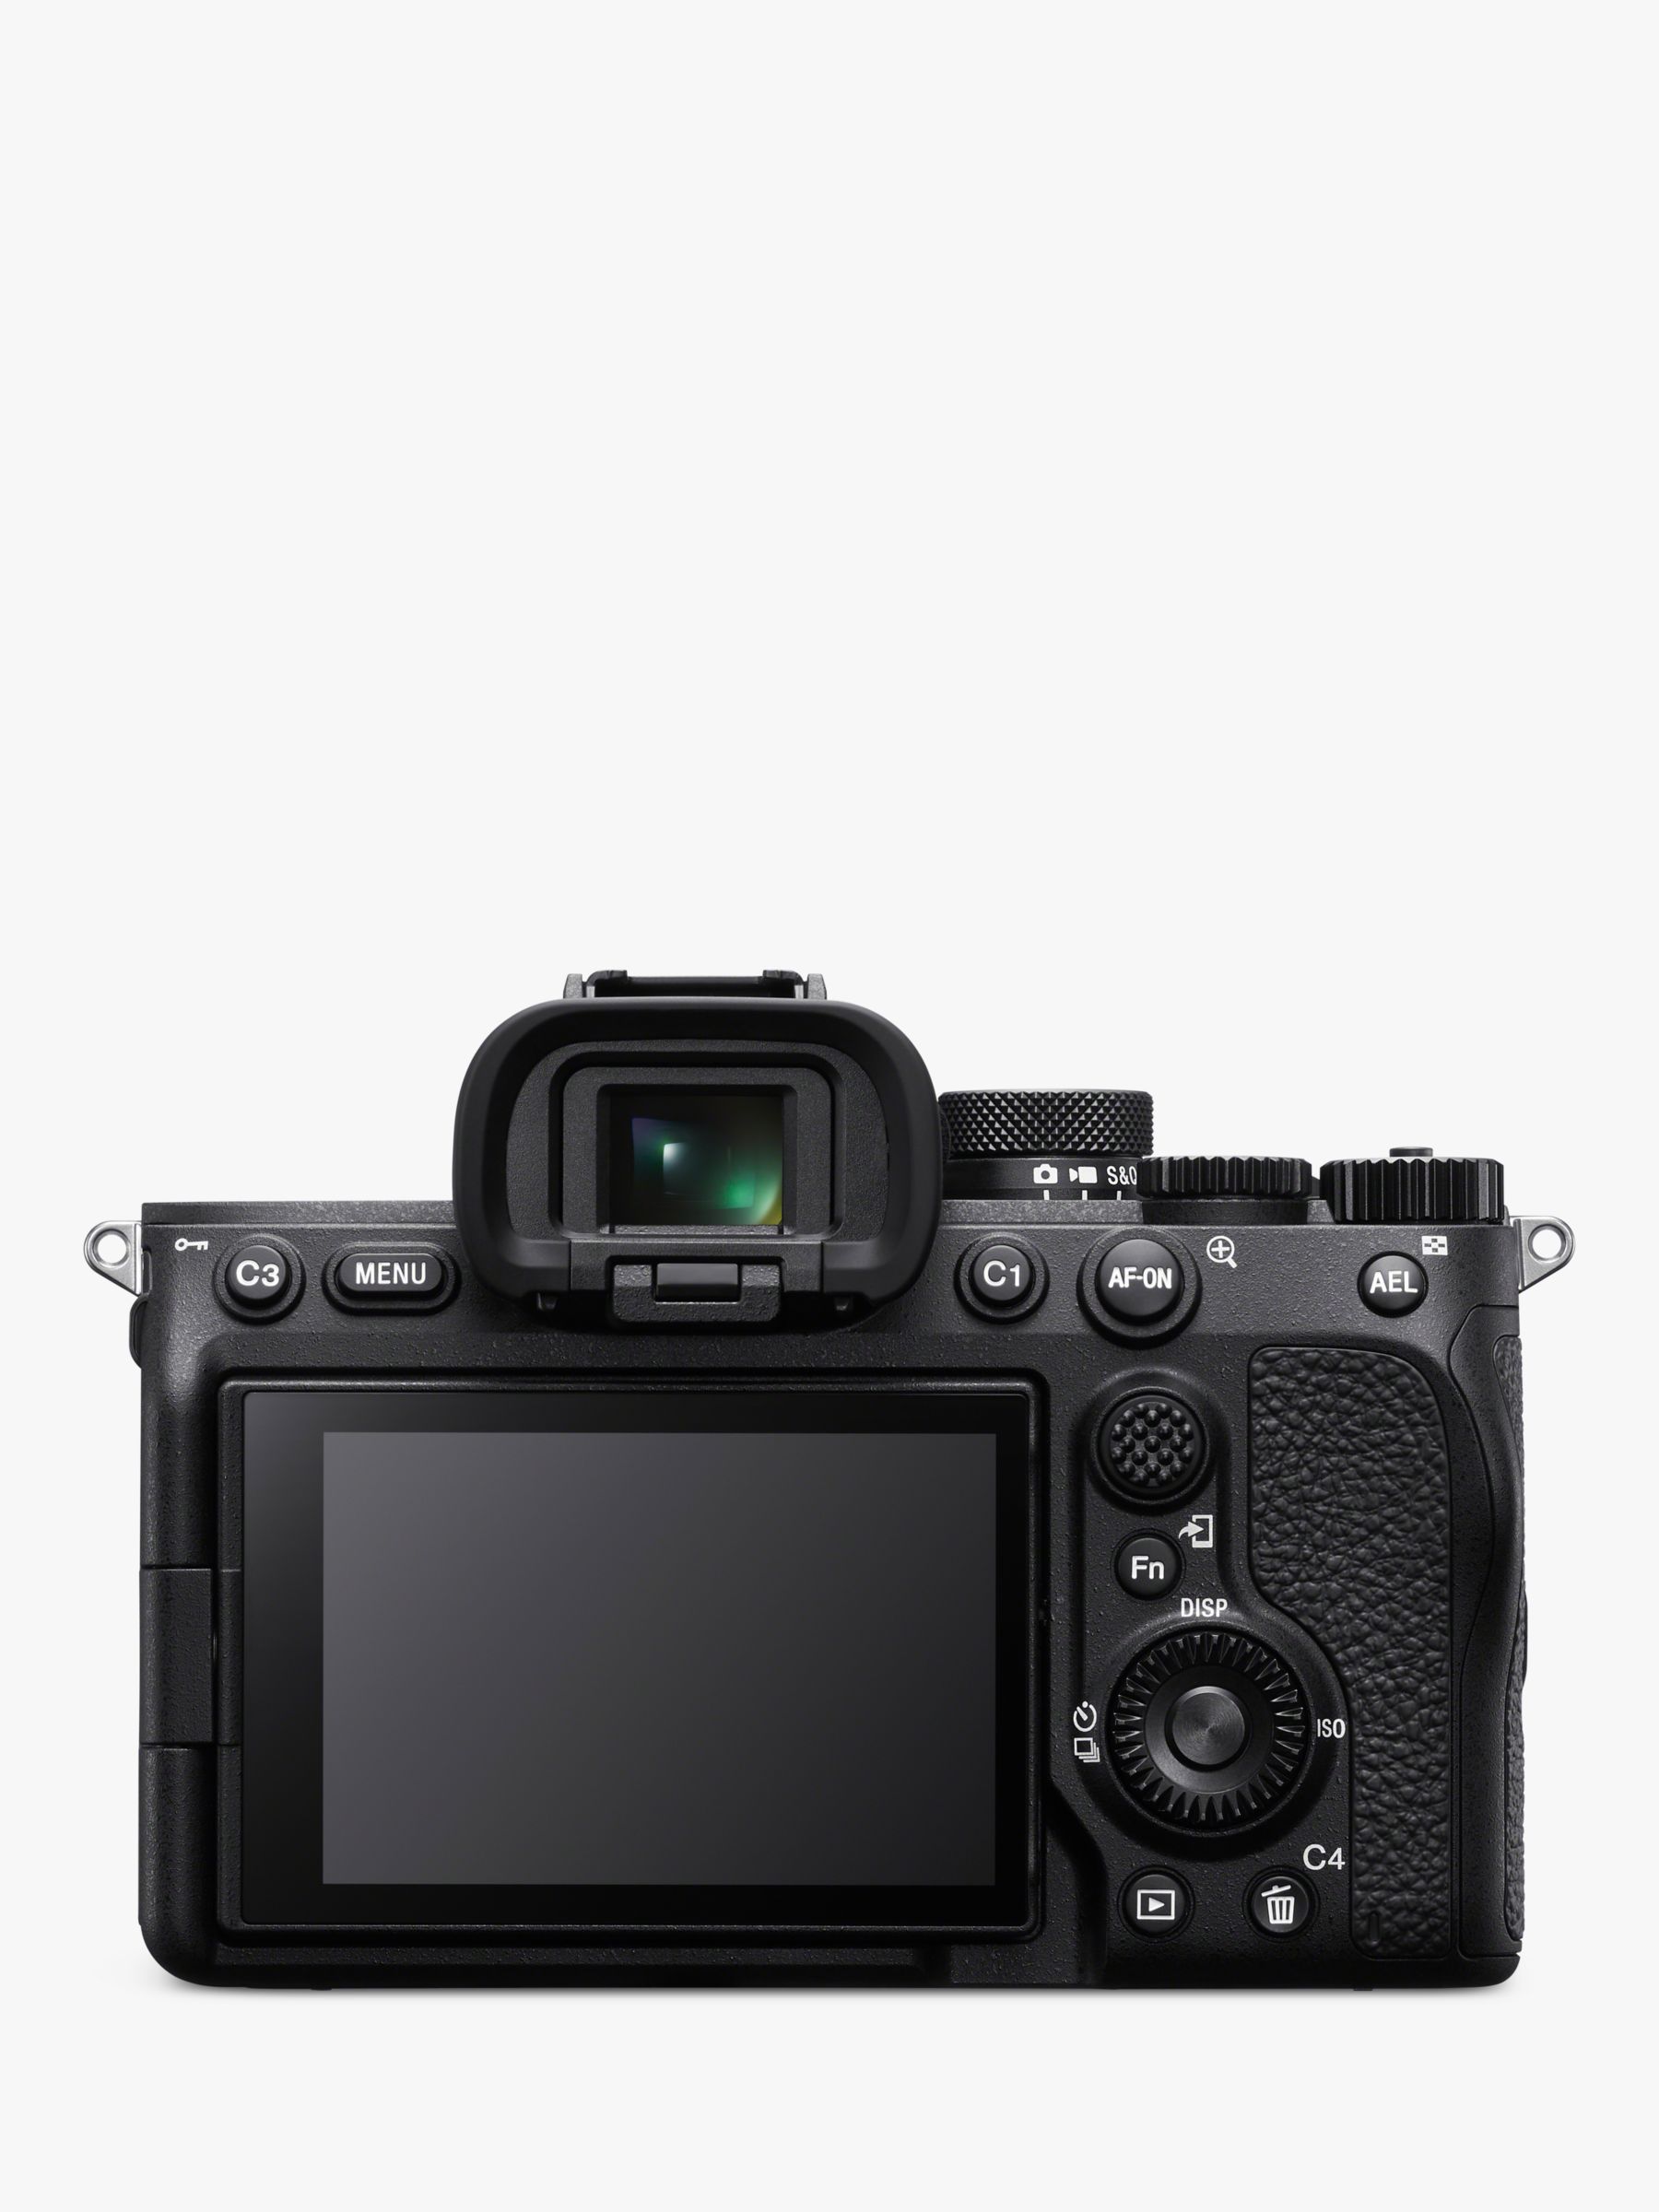 Sony Alpha 7 a7 IV Mirrorless Camera 33MP A7 ILCE-7M4 Body Only